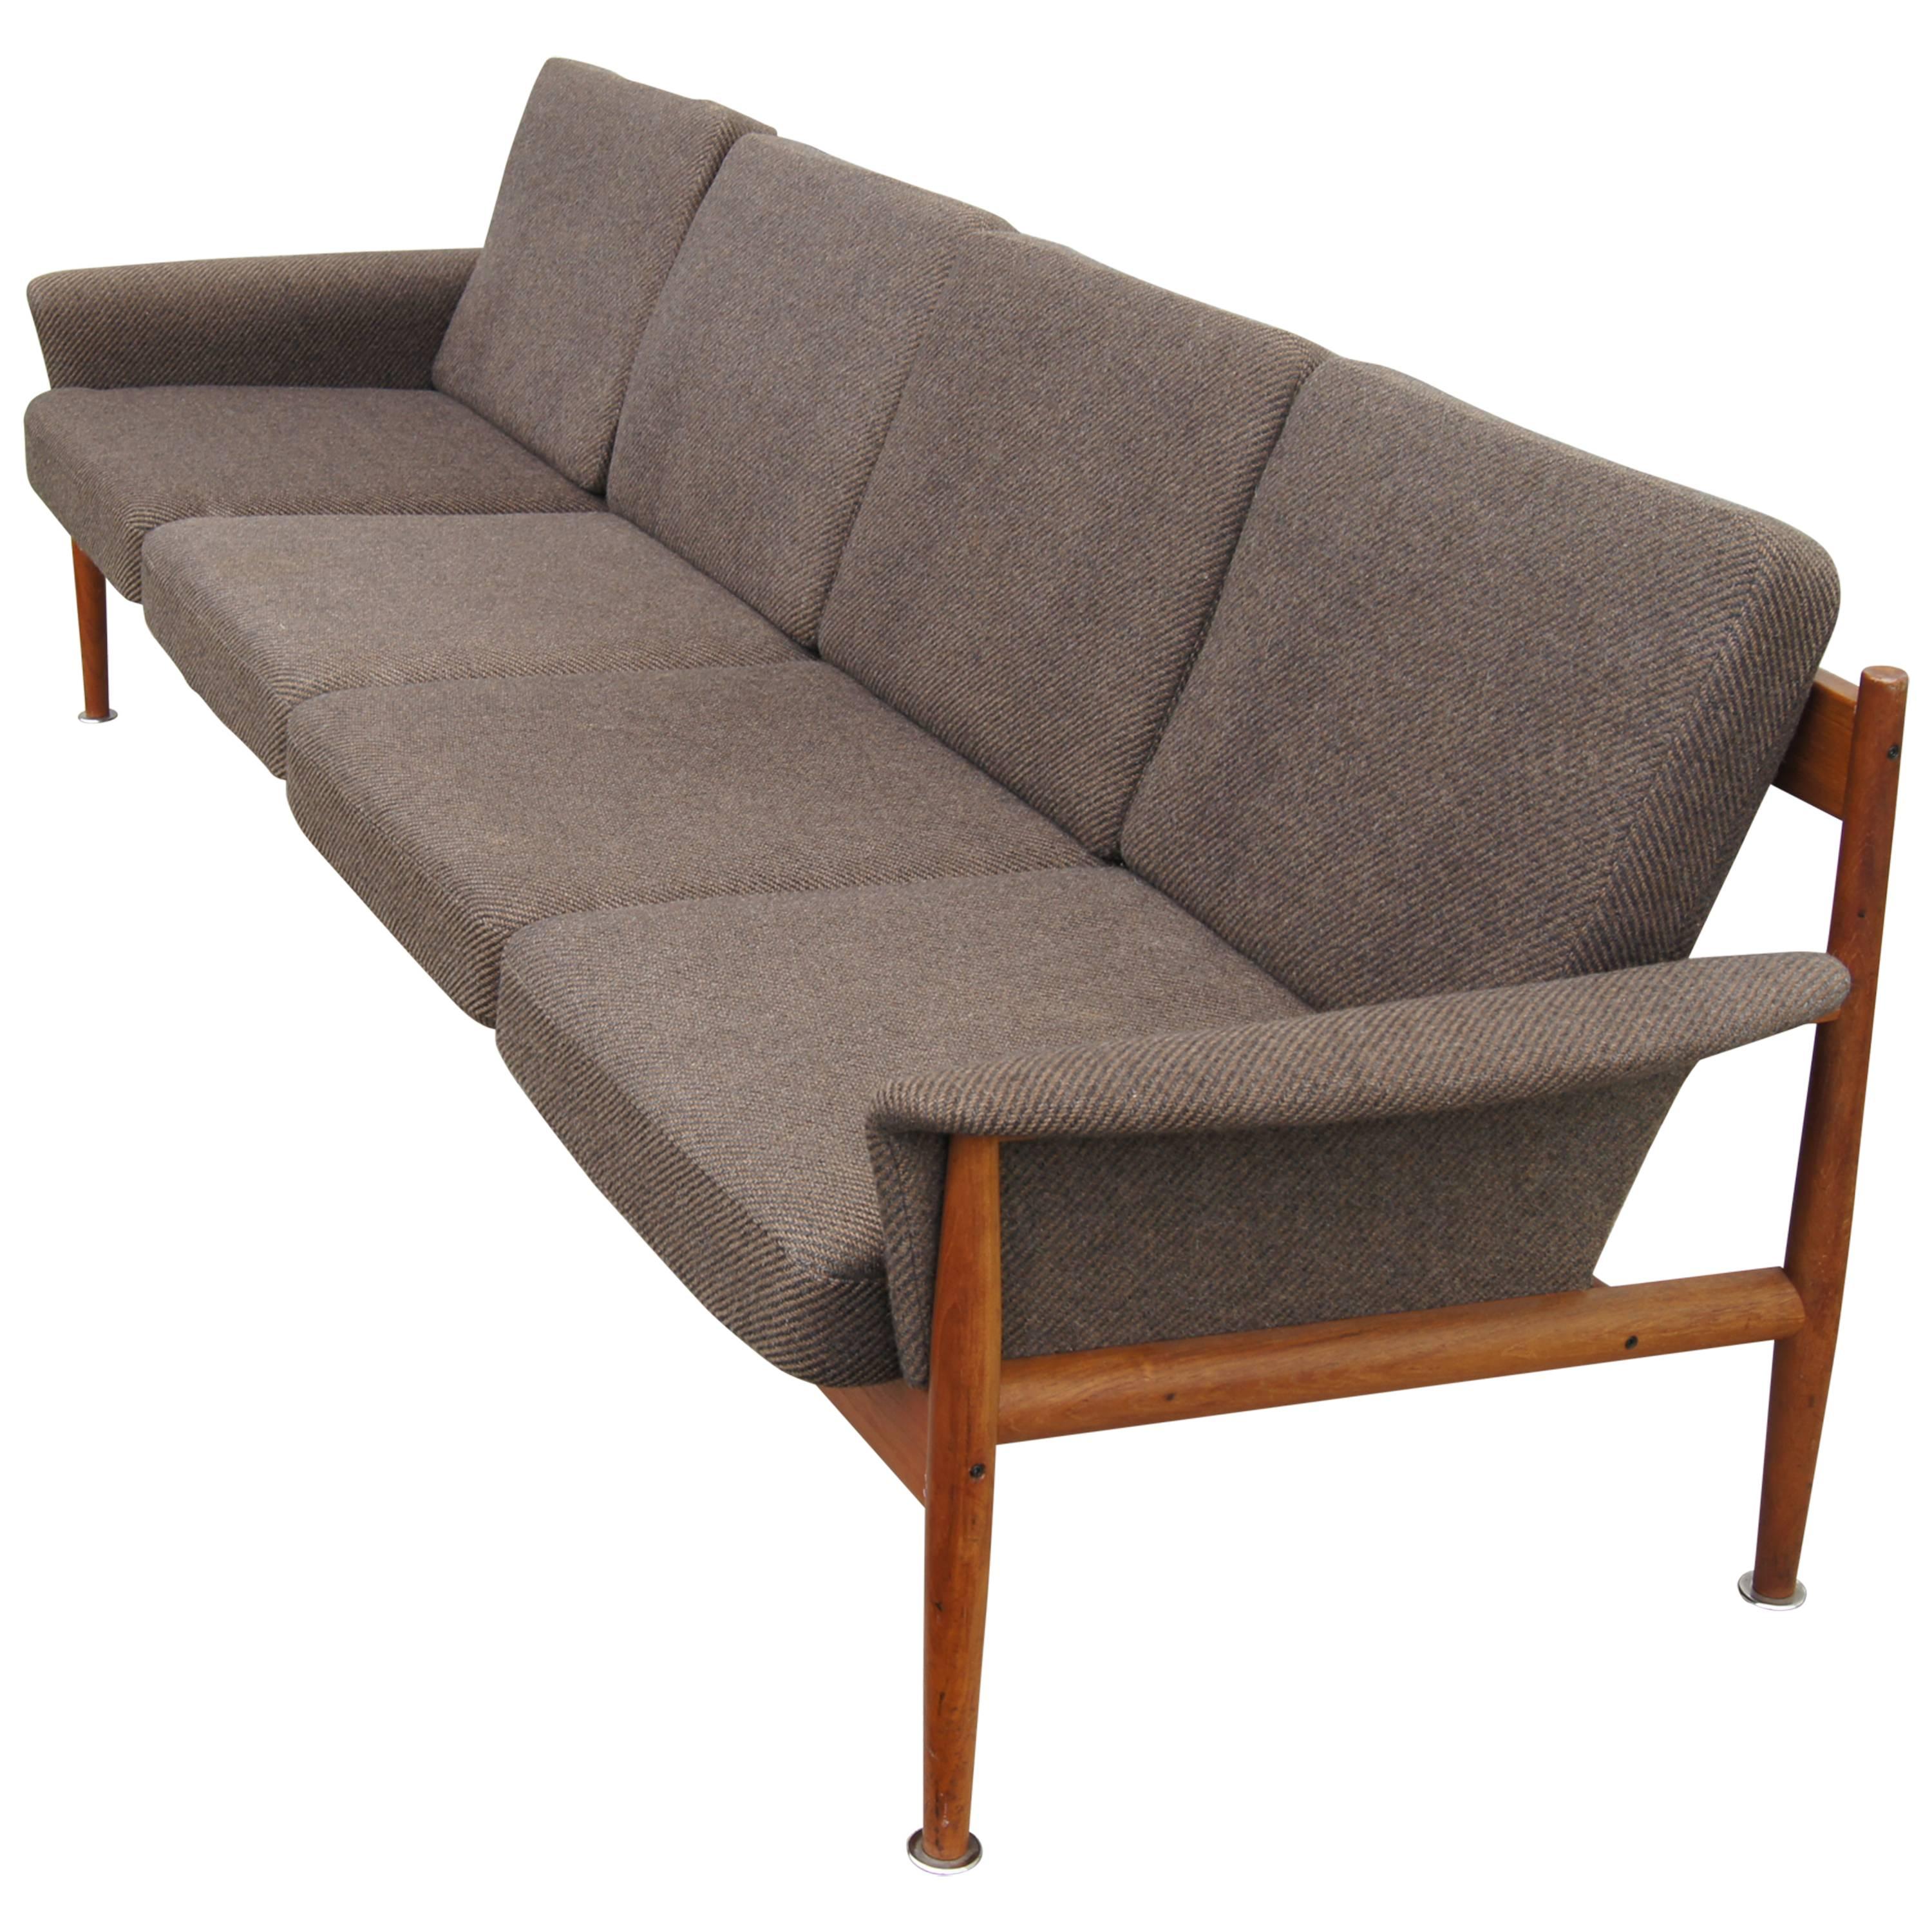 Rare Four-Seat Teak Sofa by Grete Jalk for France & Sons